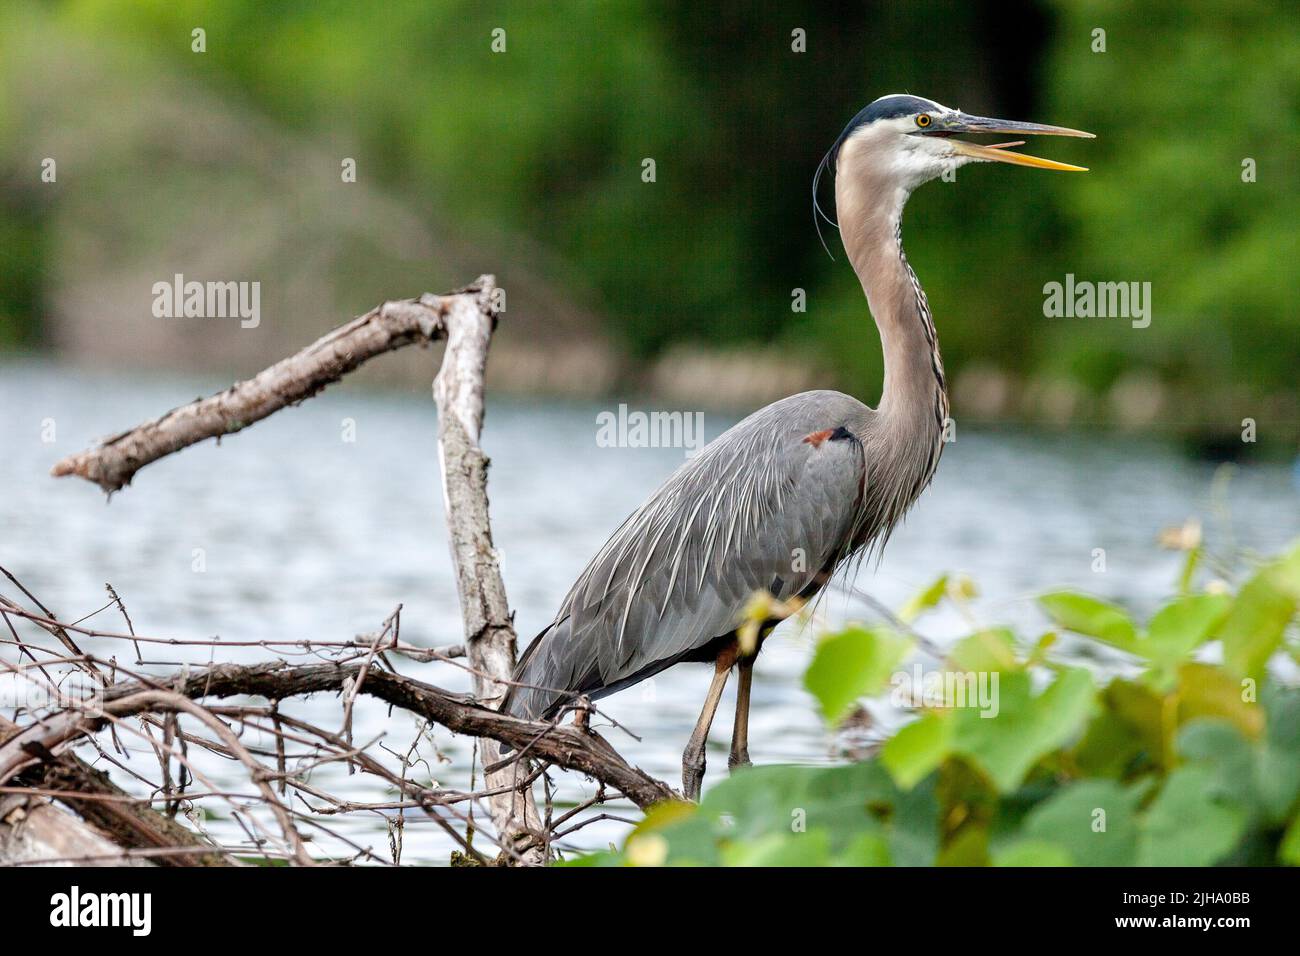 Adult Grey Heron wading in lake in search of food Stock Photo